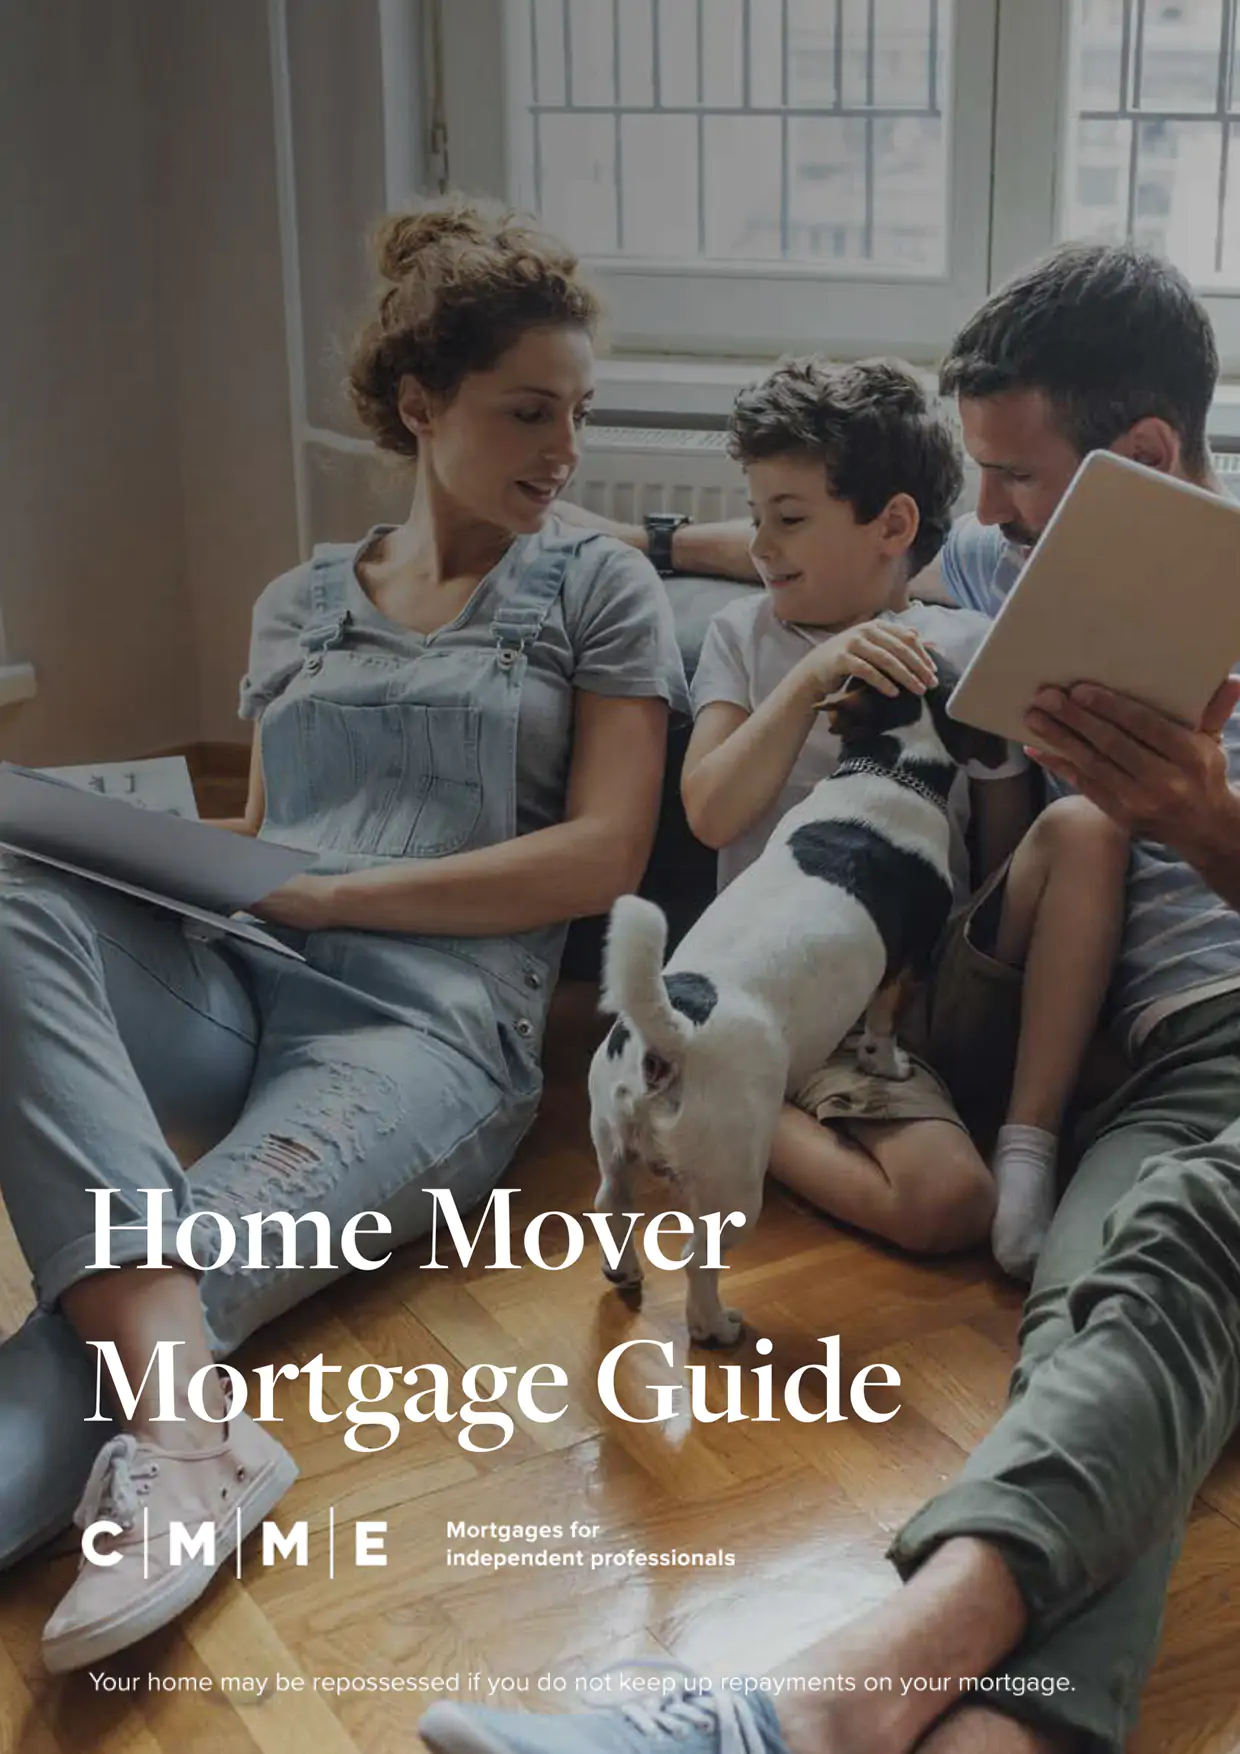 Home mover mortgage